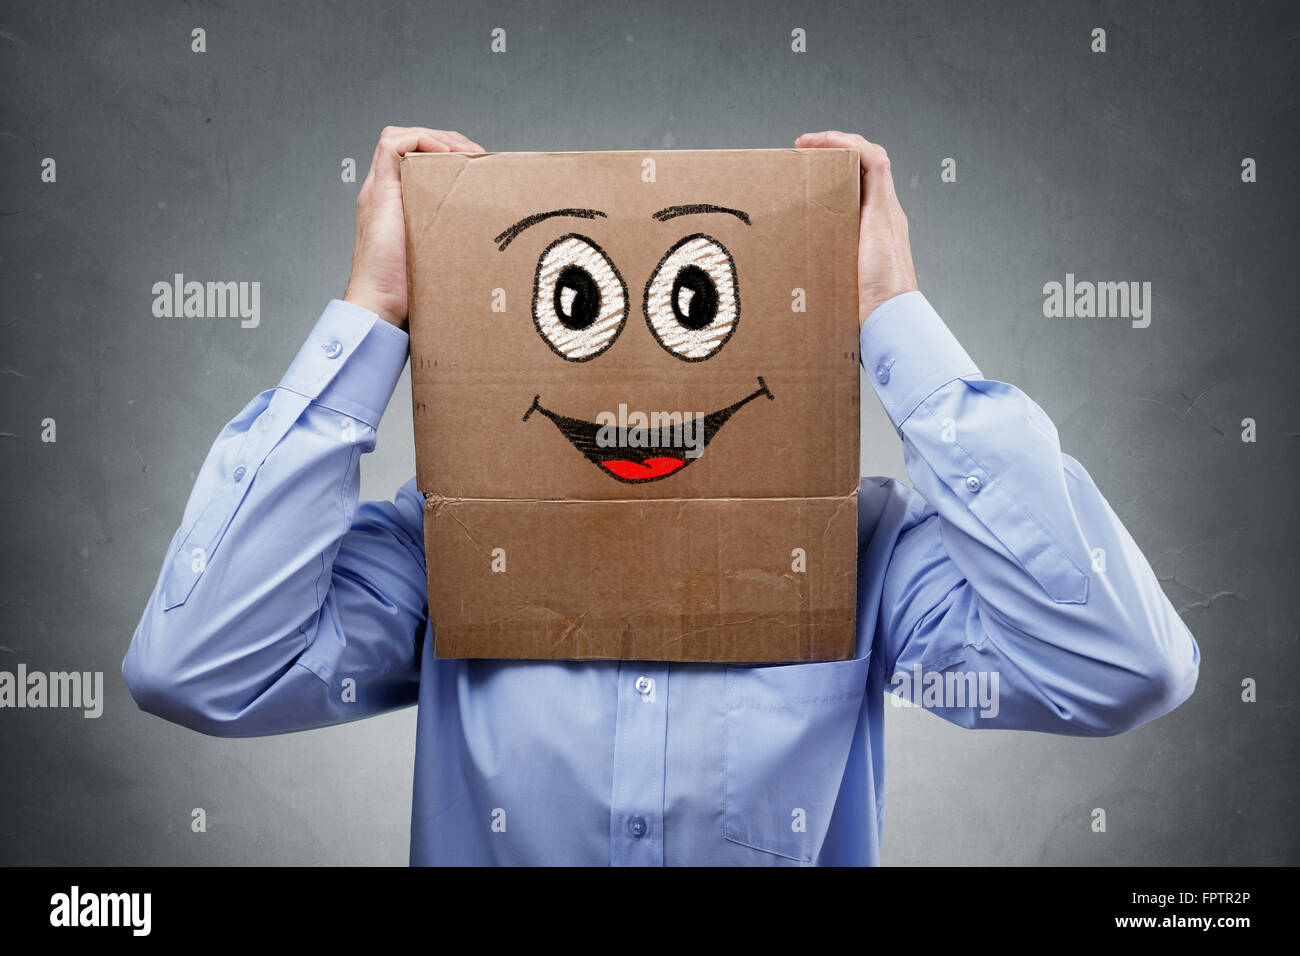 Businessman with cardboard box on his head with smiling expression concept for happiness, excitement, enthusiastic or success Stock Photo